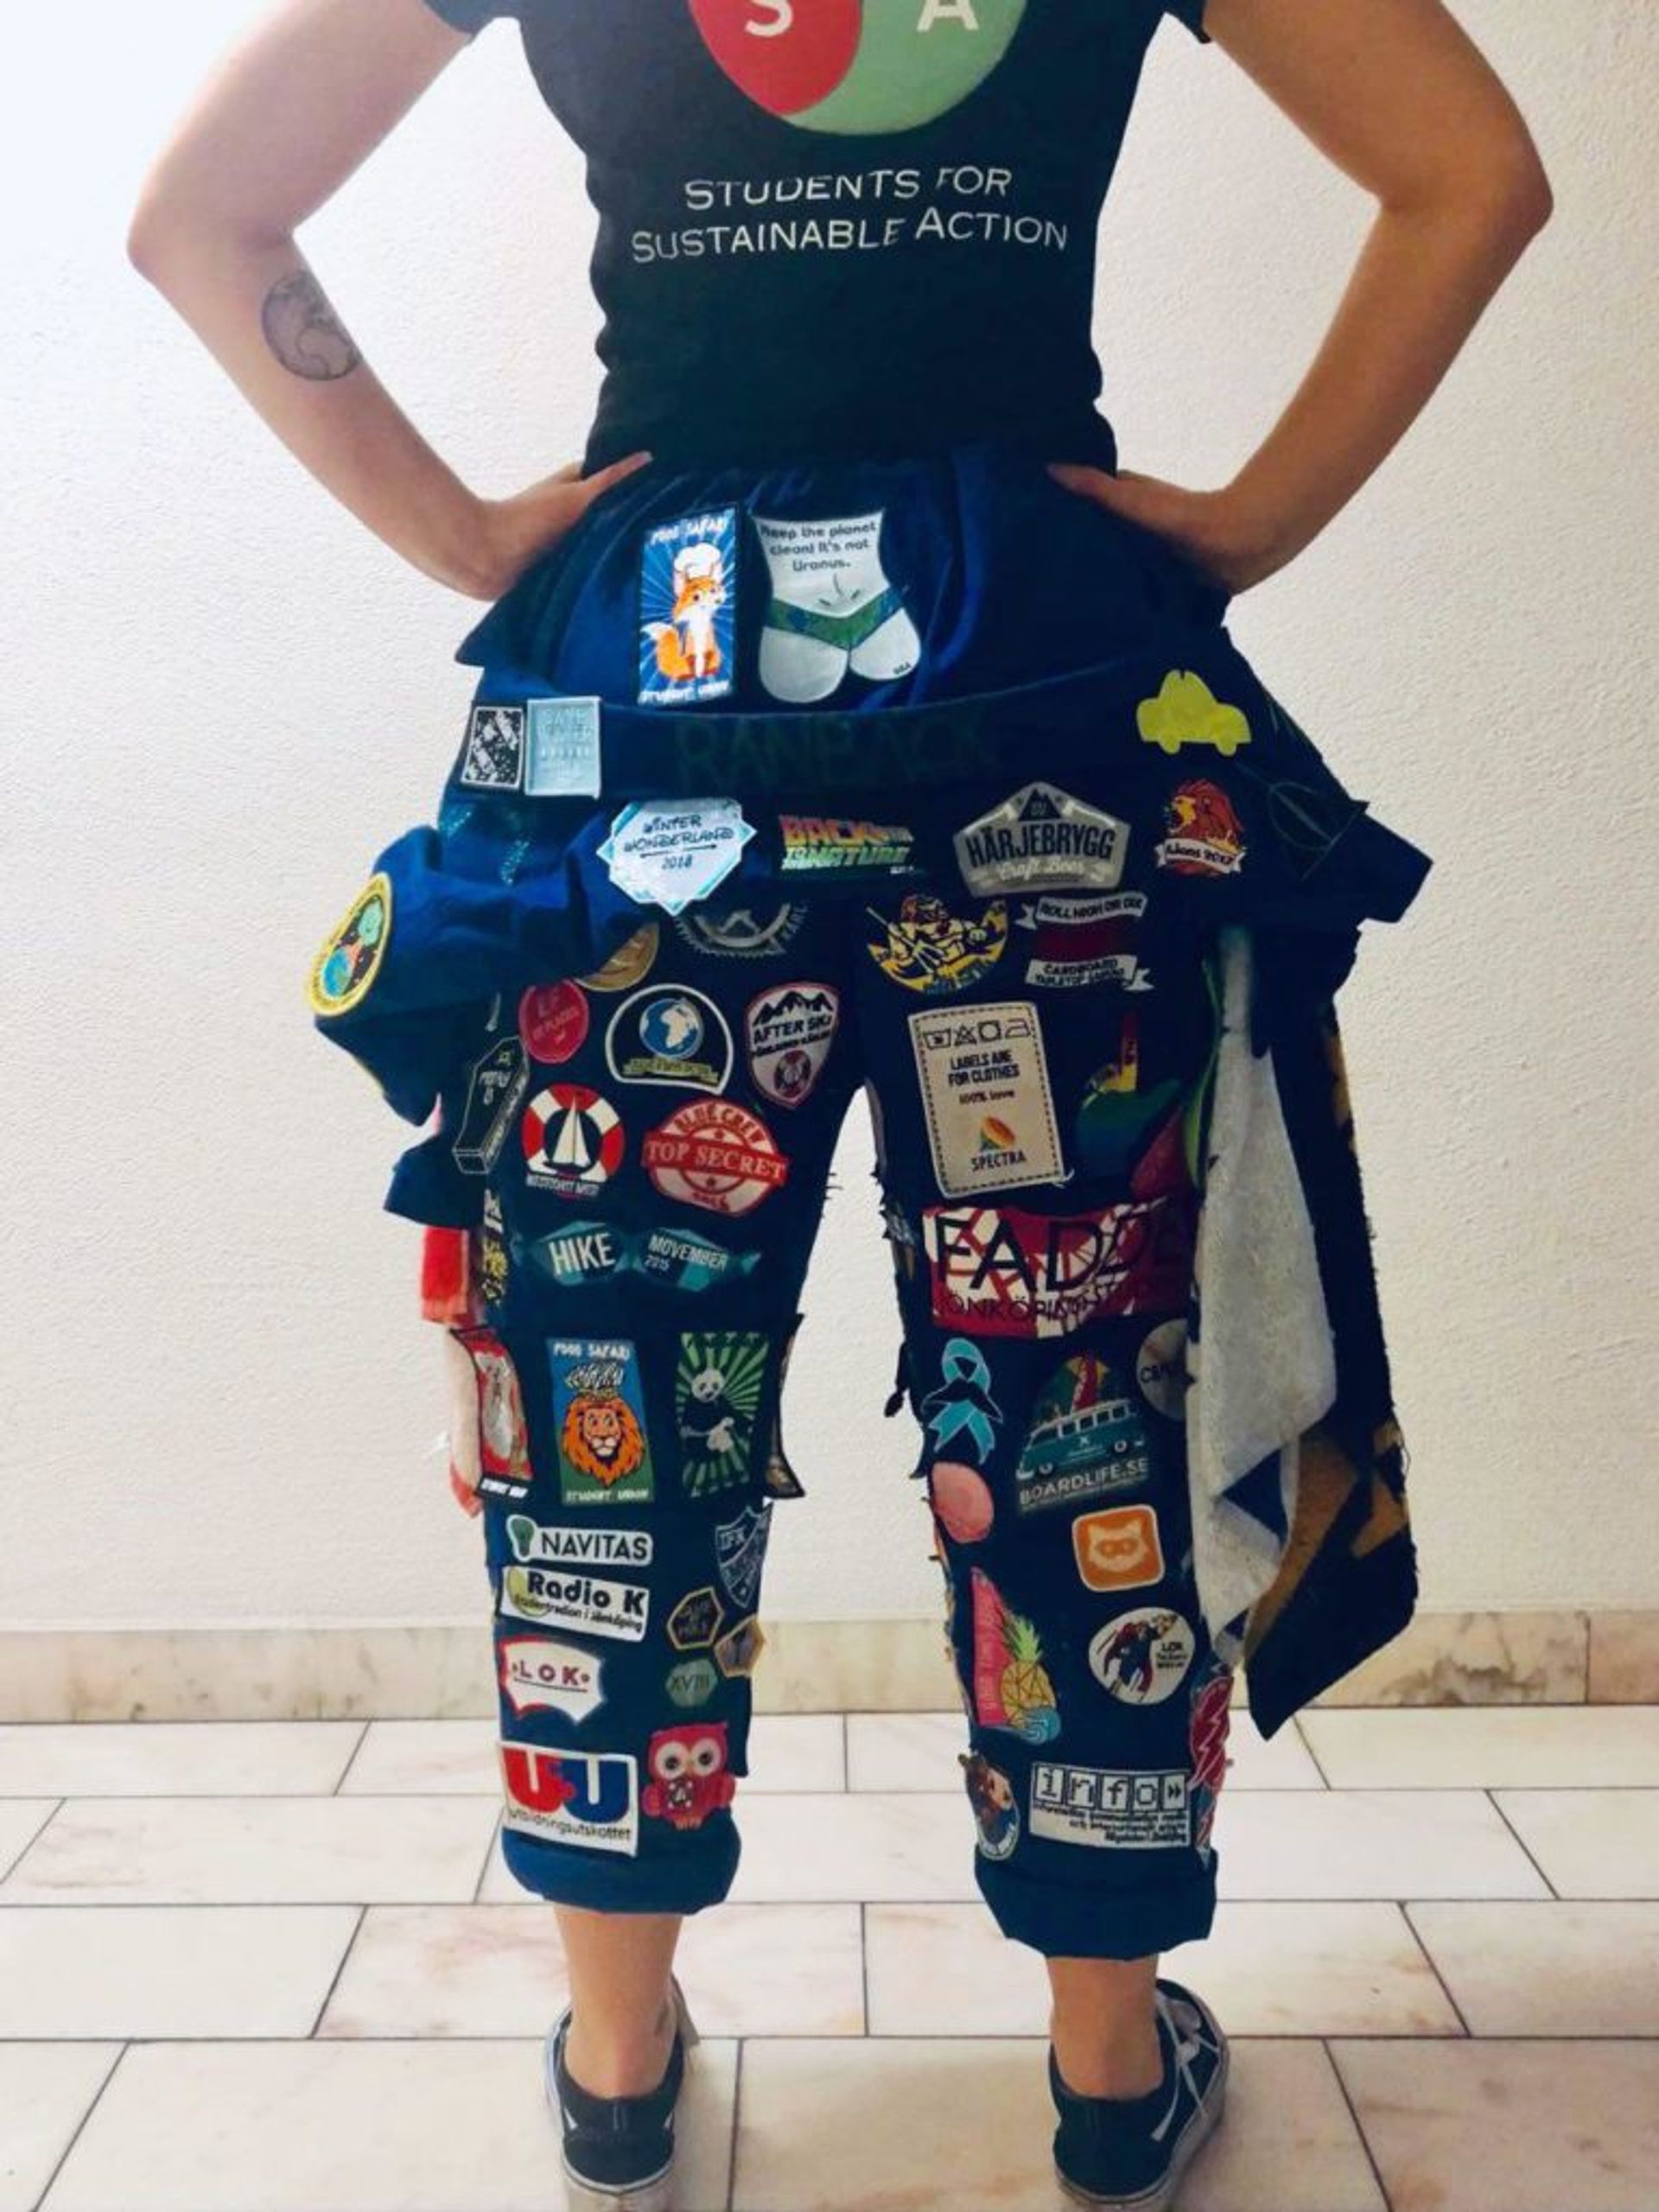 Student wearing an overall covered in patches.